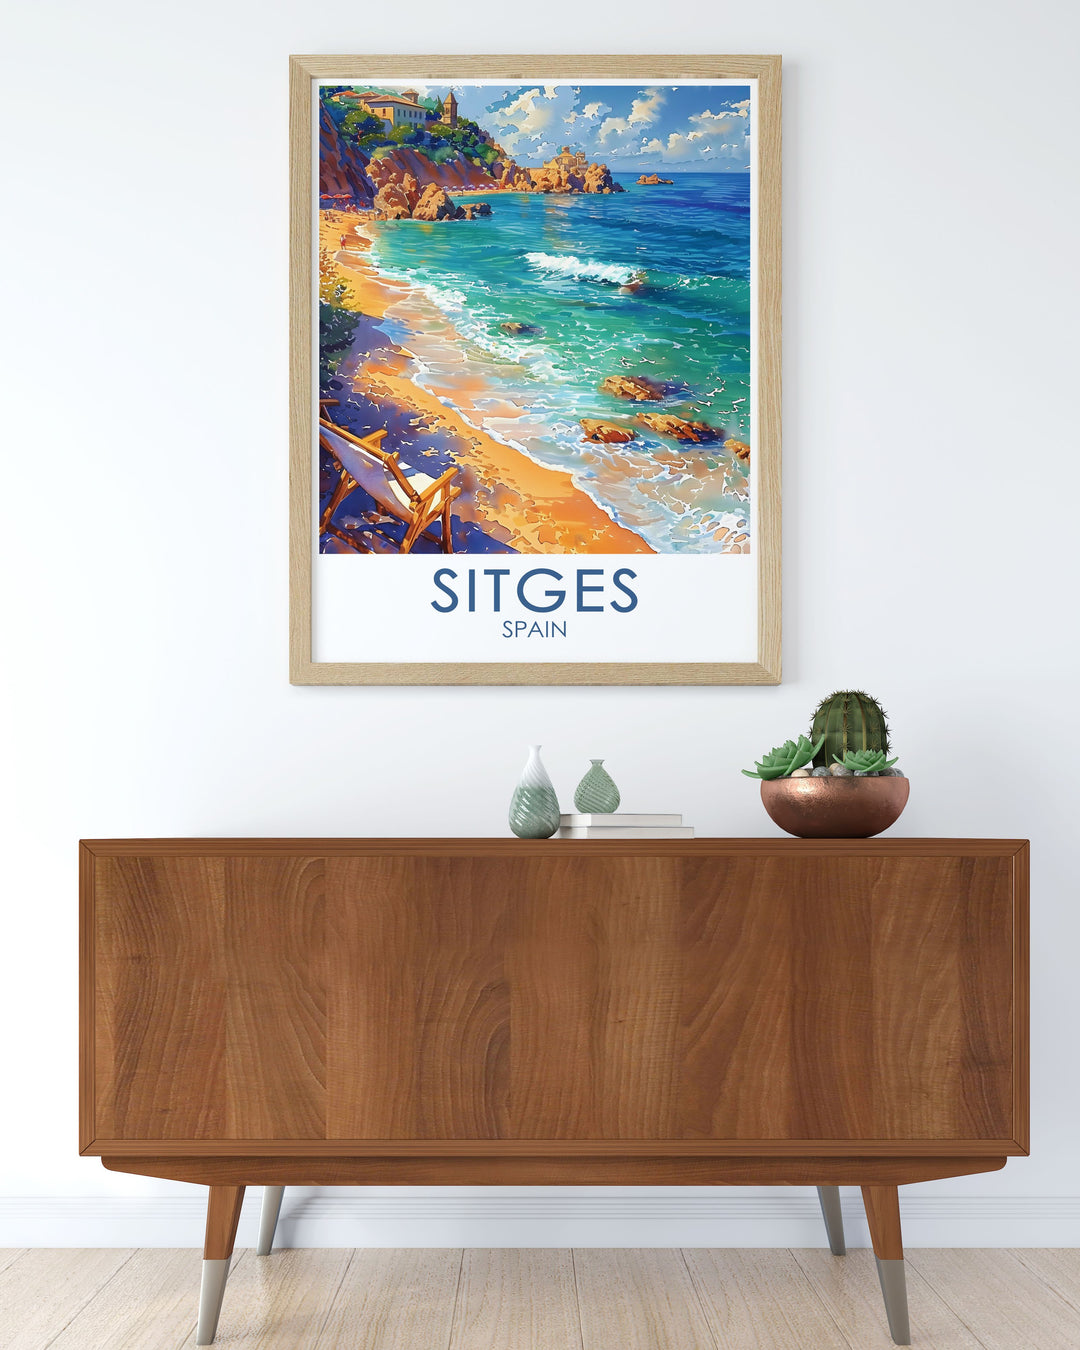 The vibrant streets and beautiful beaches of Sitges are beautifully depicted in this travel poster, celebrating the iconic landmarks and natural beauty of Spain.